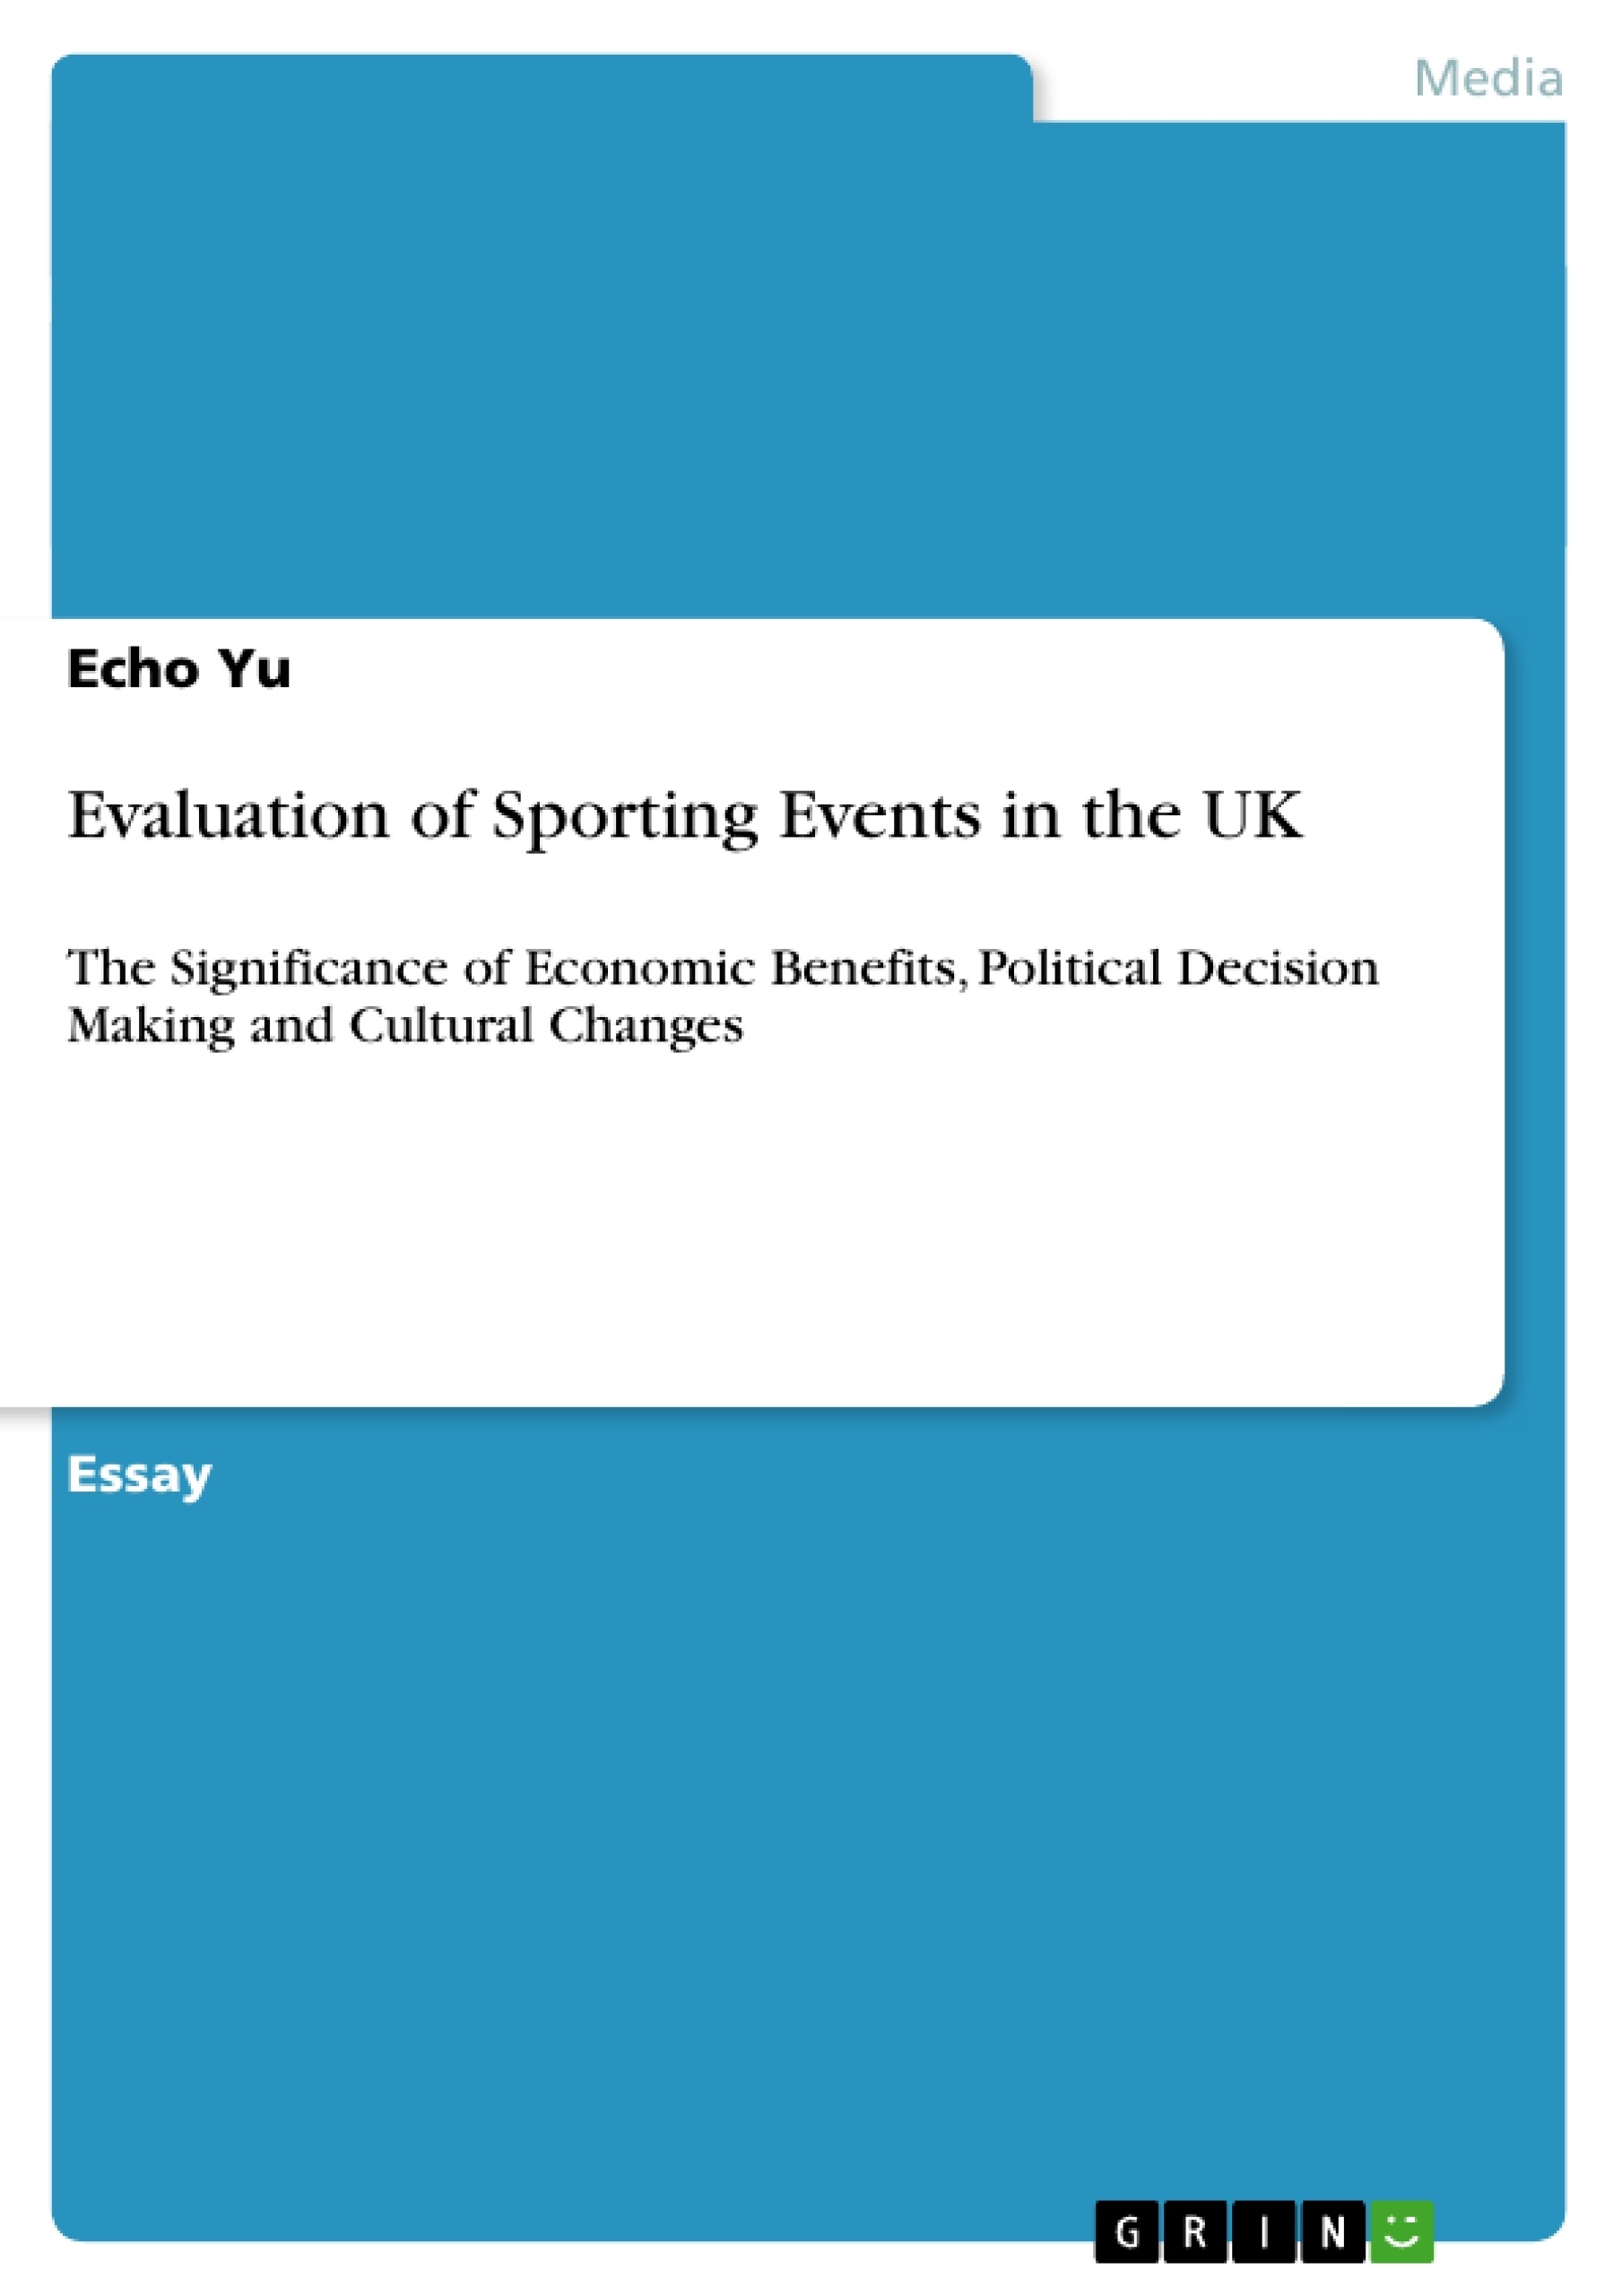 Title: Evaluation of Sporting Events in the UK